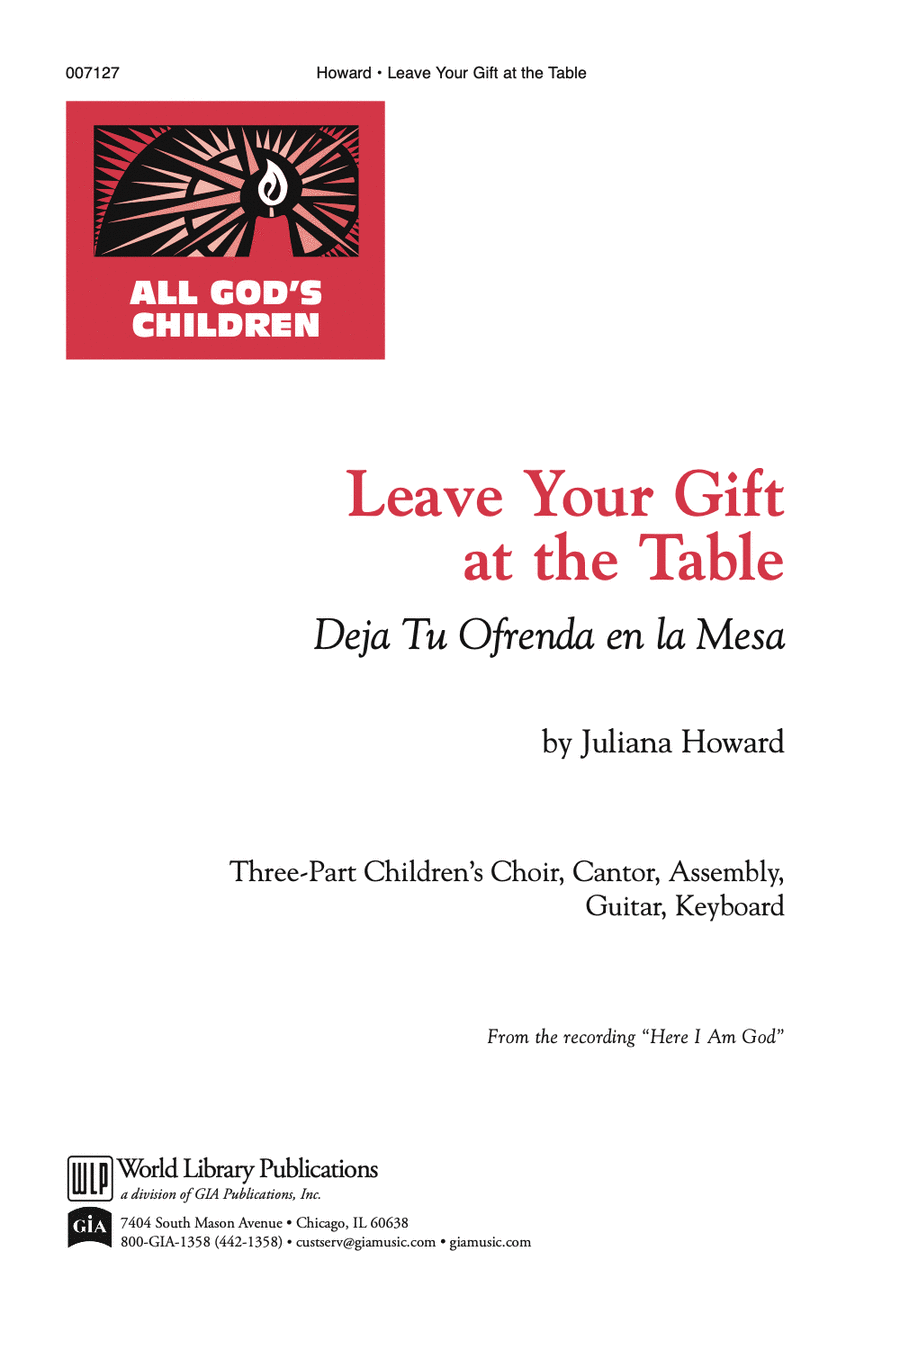 Leave Your Gift At the Table